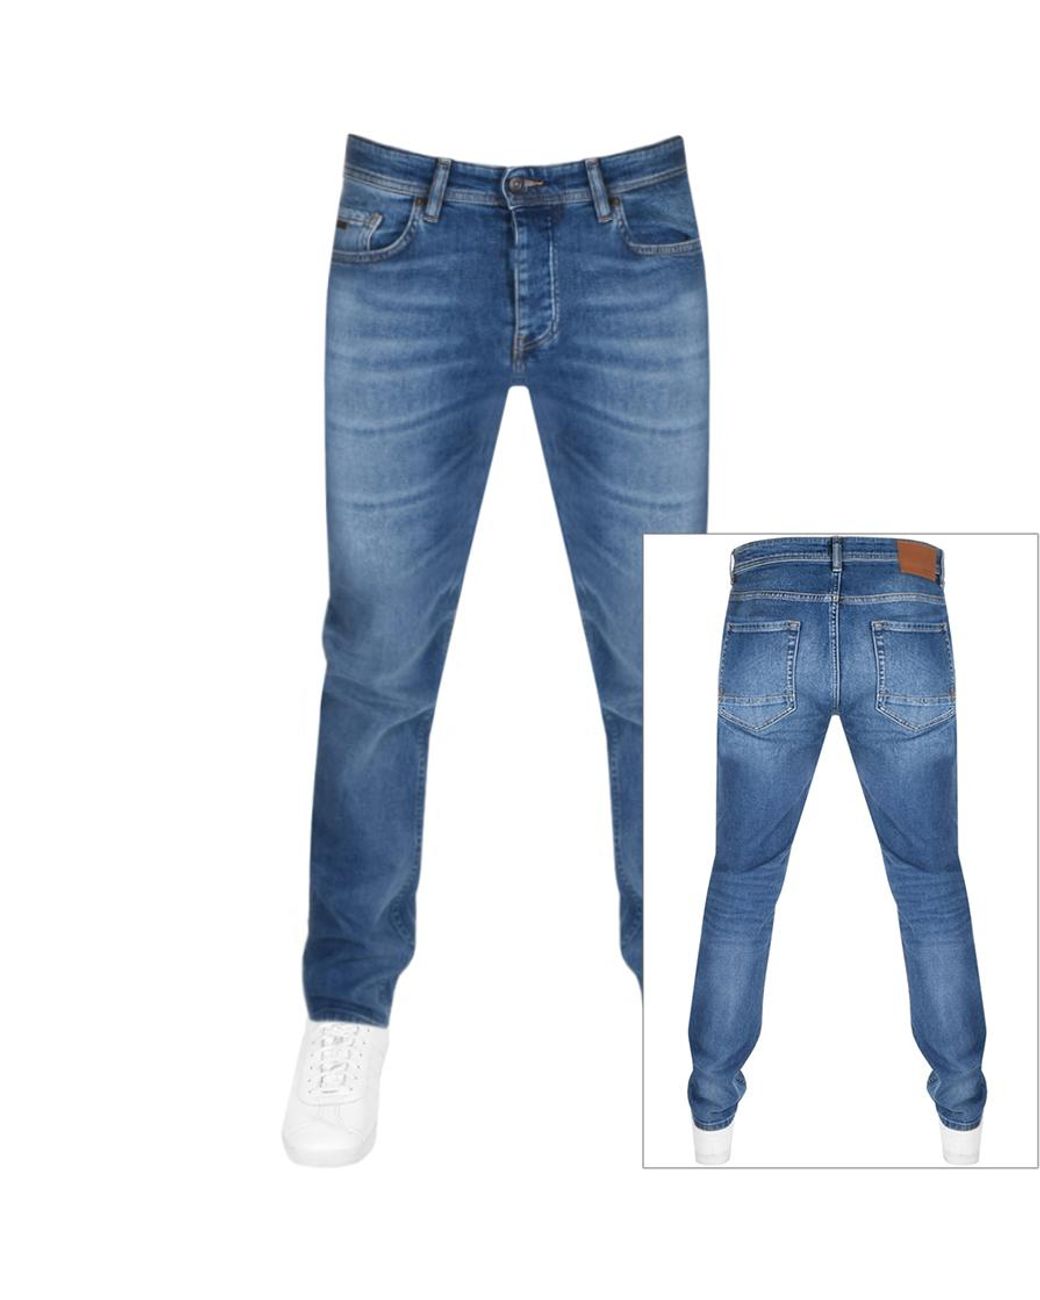 BOSS by HUGO BOSS Denim Taber Tapered Fit Jeans in Blue for Men Mens Clothing Jeans Tapered jeans 